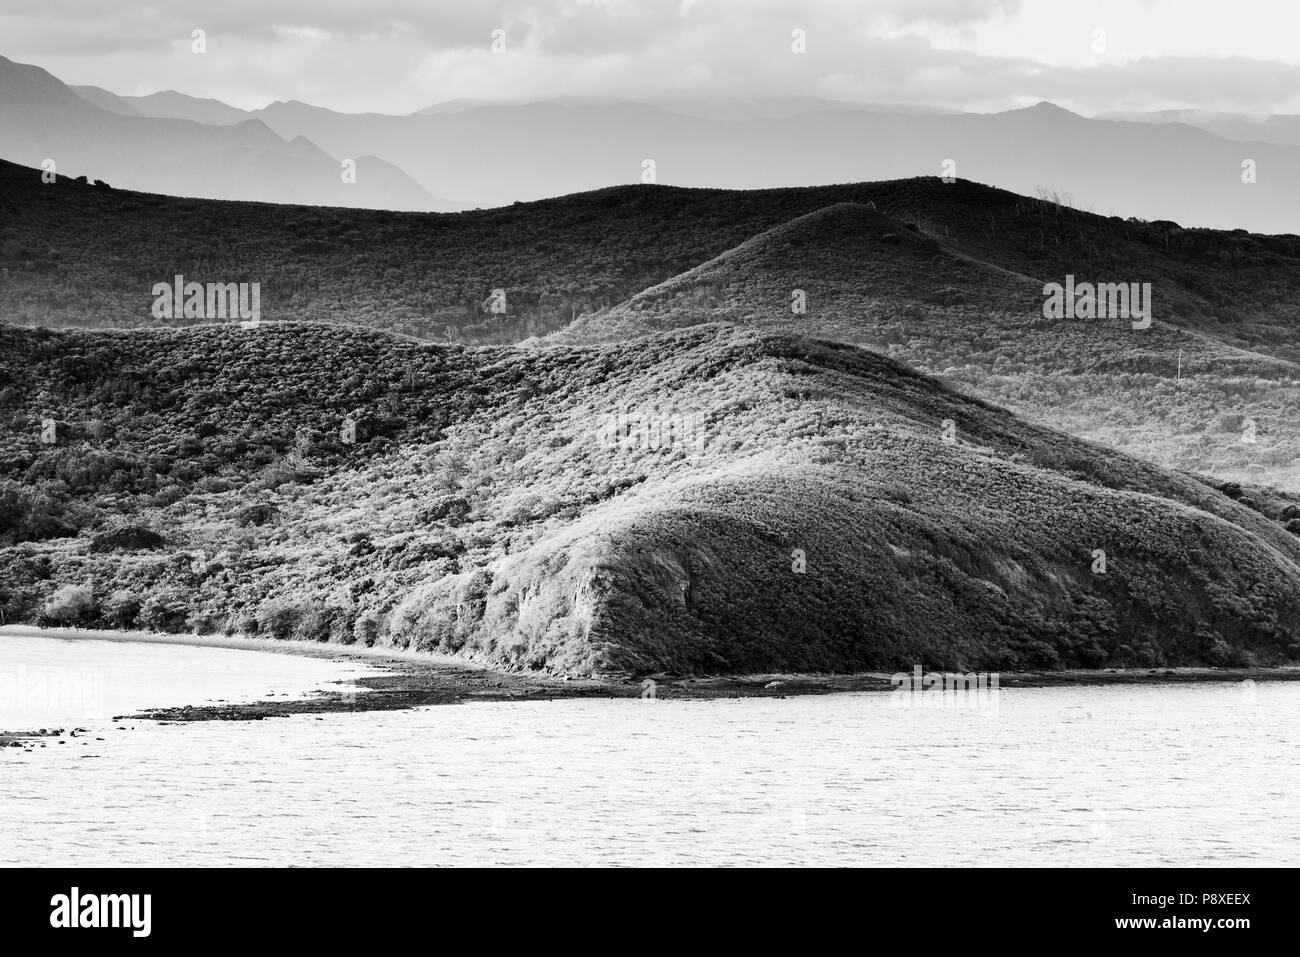 Sunset landscape on the hills around Noumea, New Caledonia in black and white Stock Photo